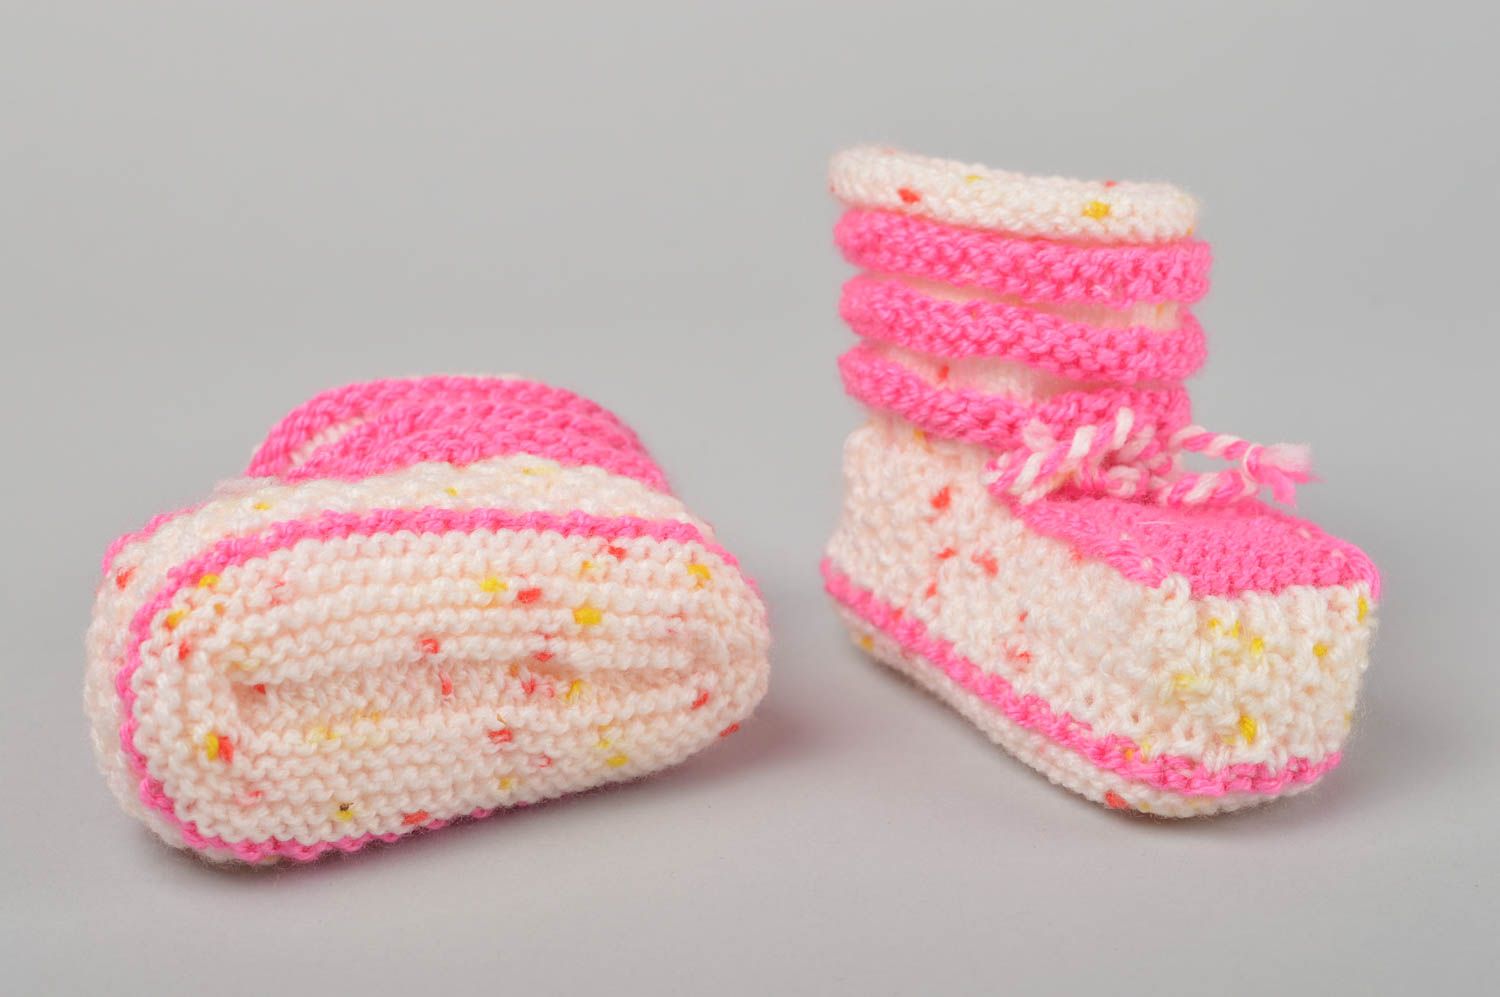 Handmade bootees designer bootees baby bootees crochet bootees warm bootees photo 3